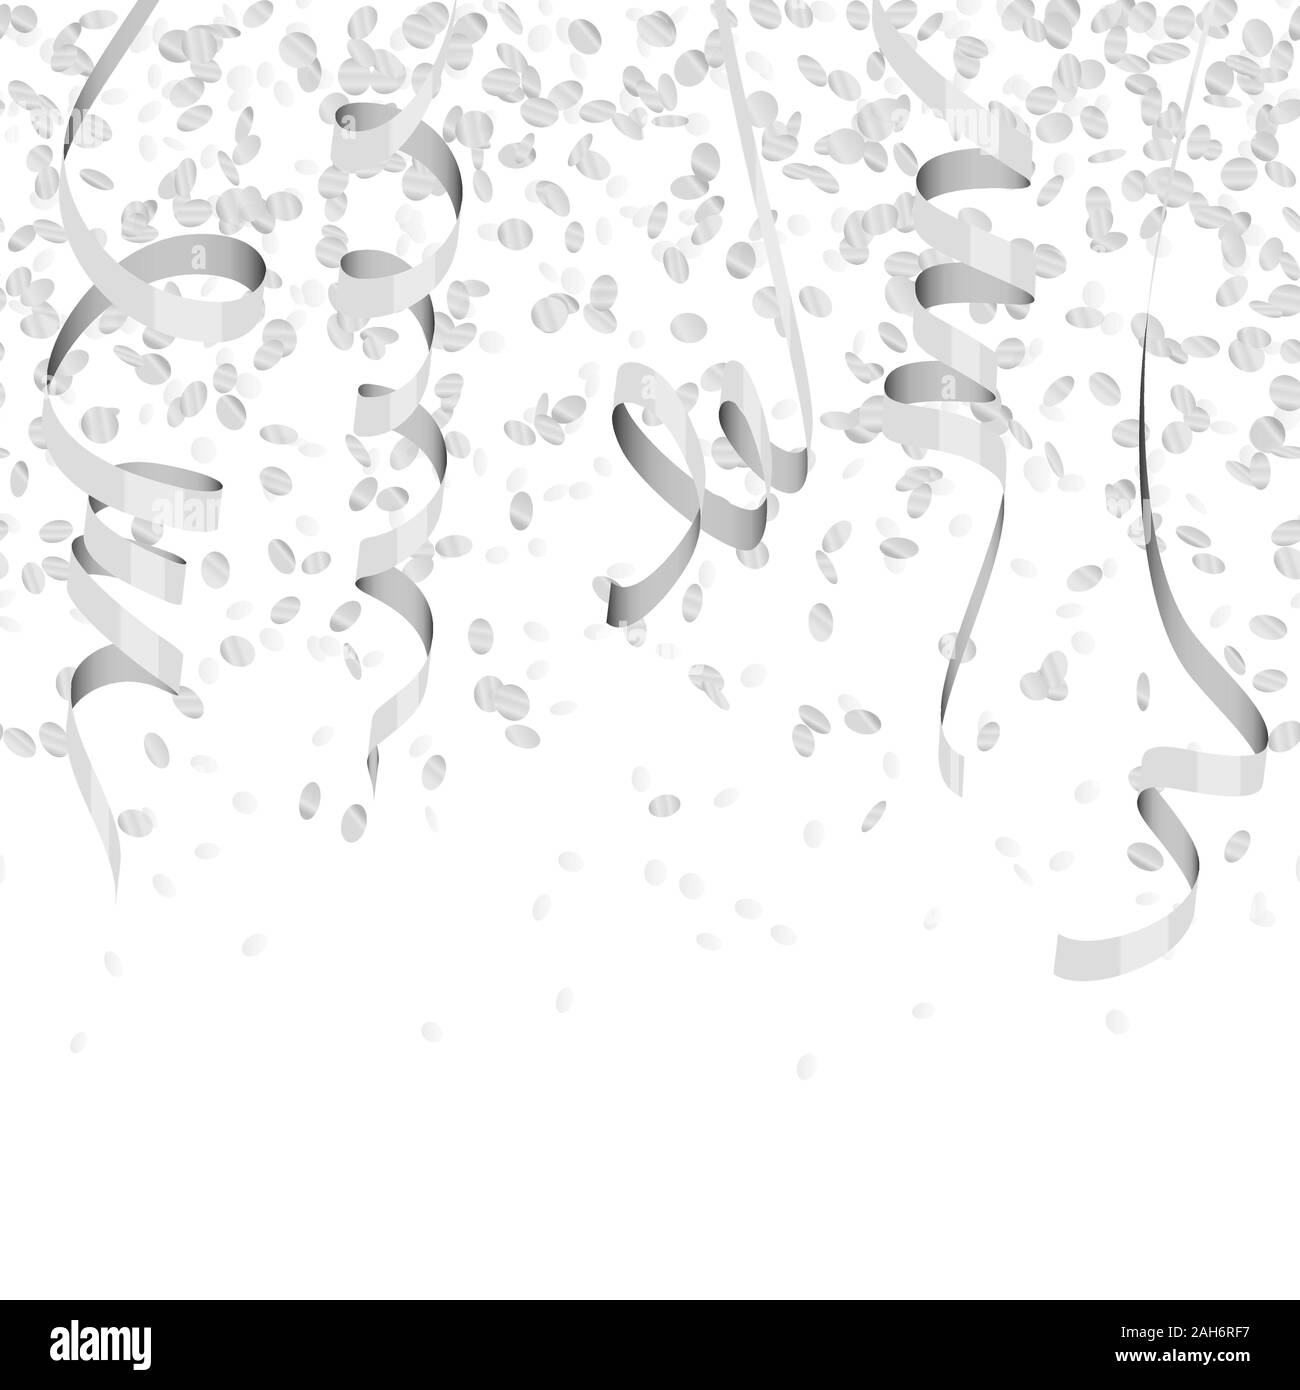 vector illustration of seamless silver colored confetti and streamers for carneval or party time on white background Stock Vector